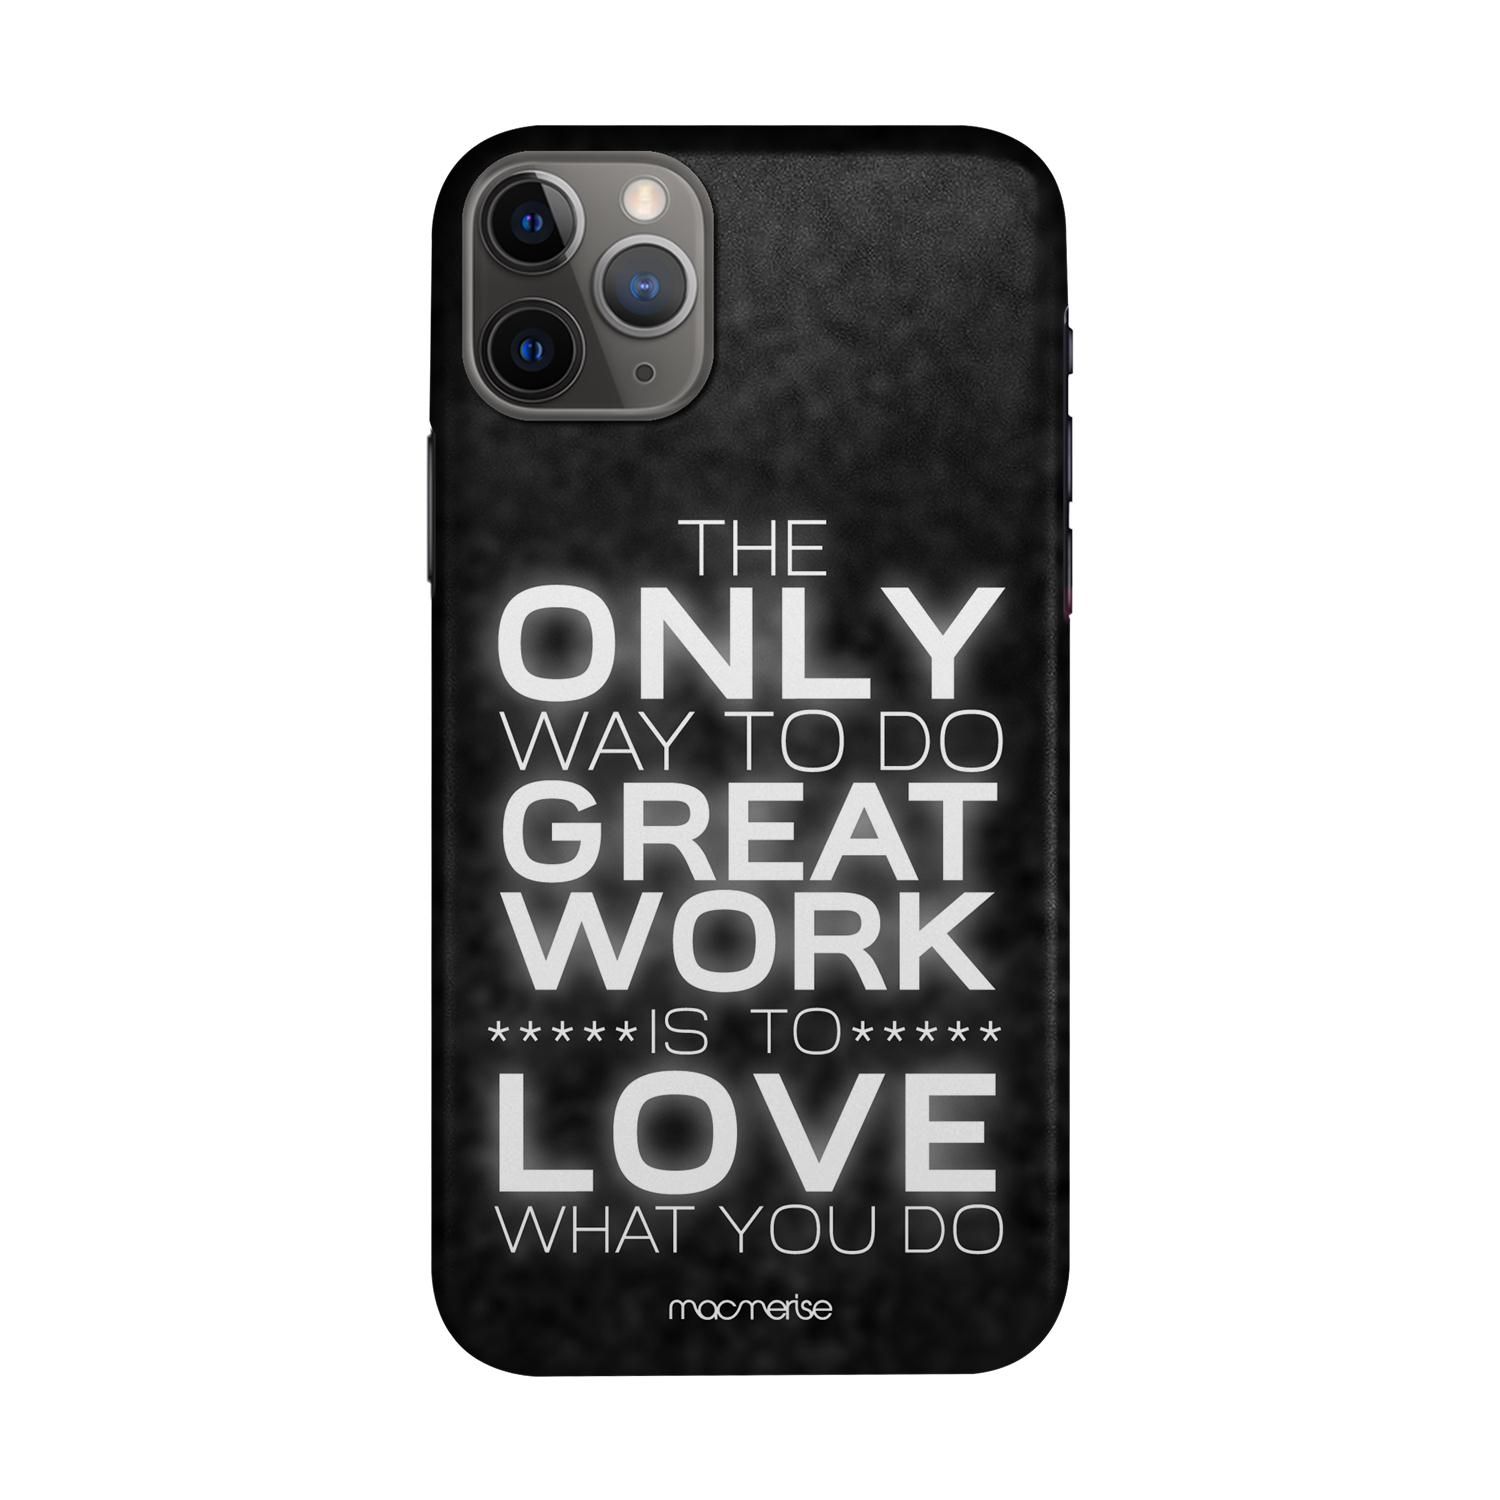 Love What You Do - Sleek Phone Case for iPhone 11 Pro Max